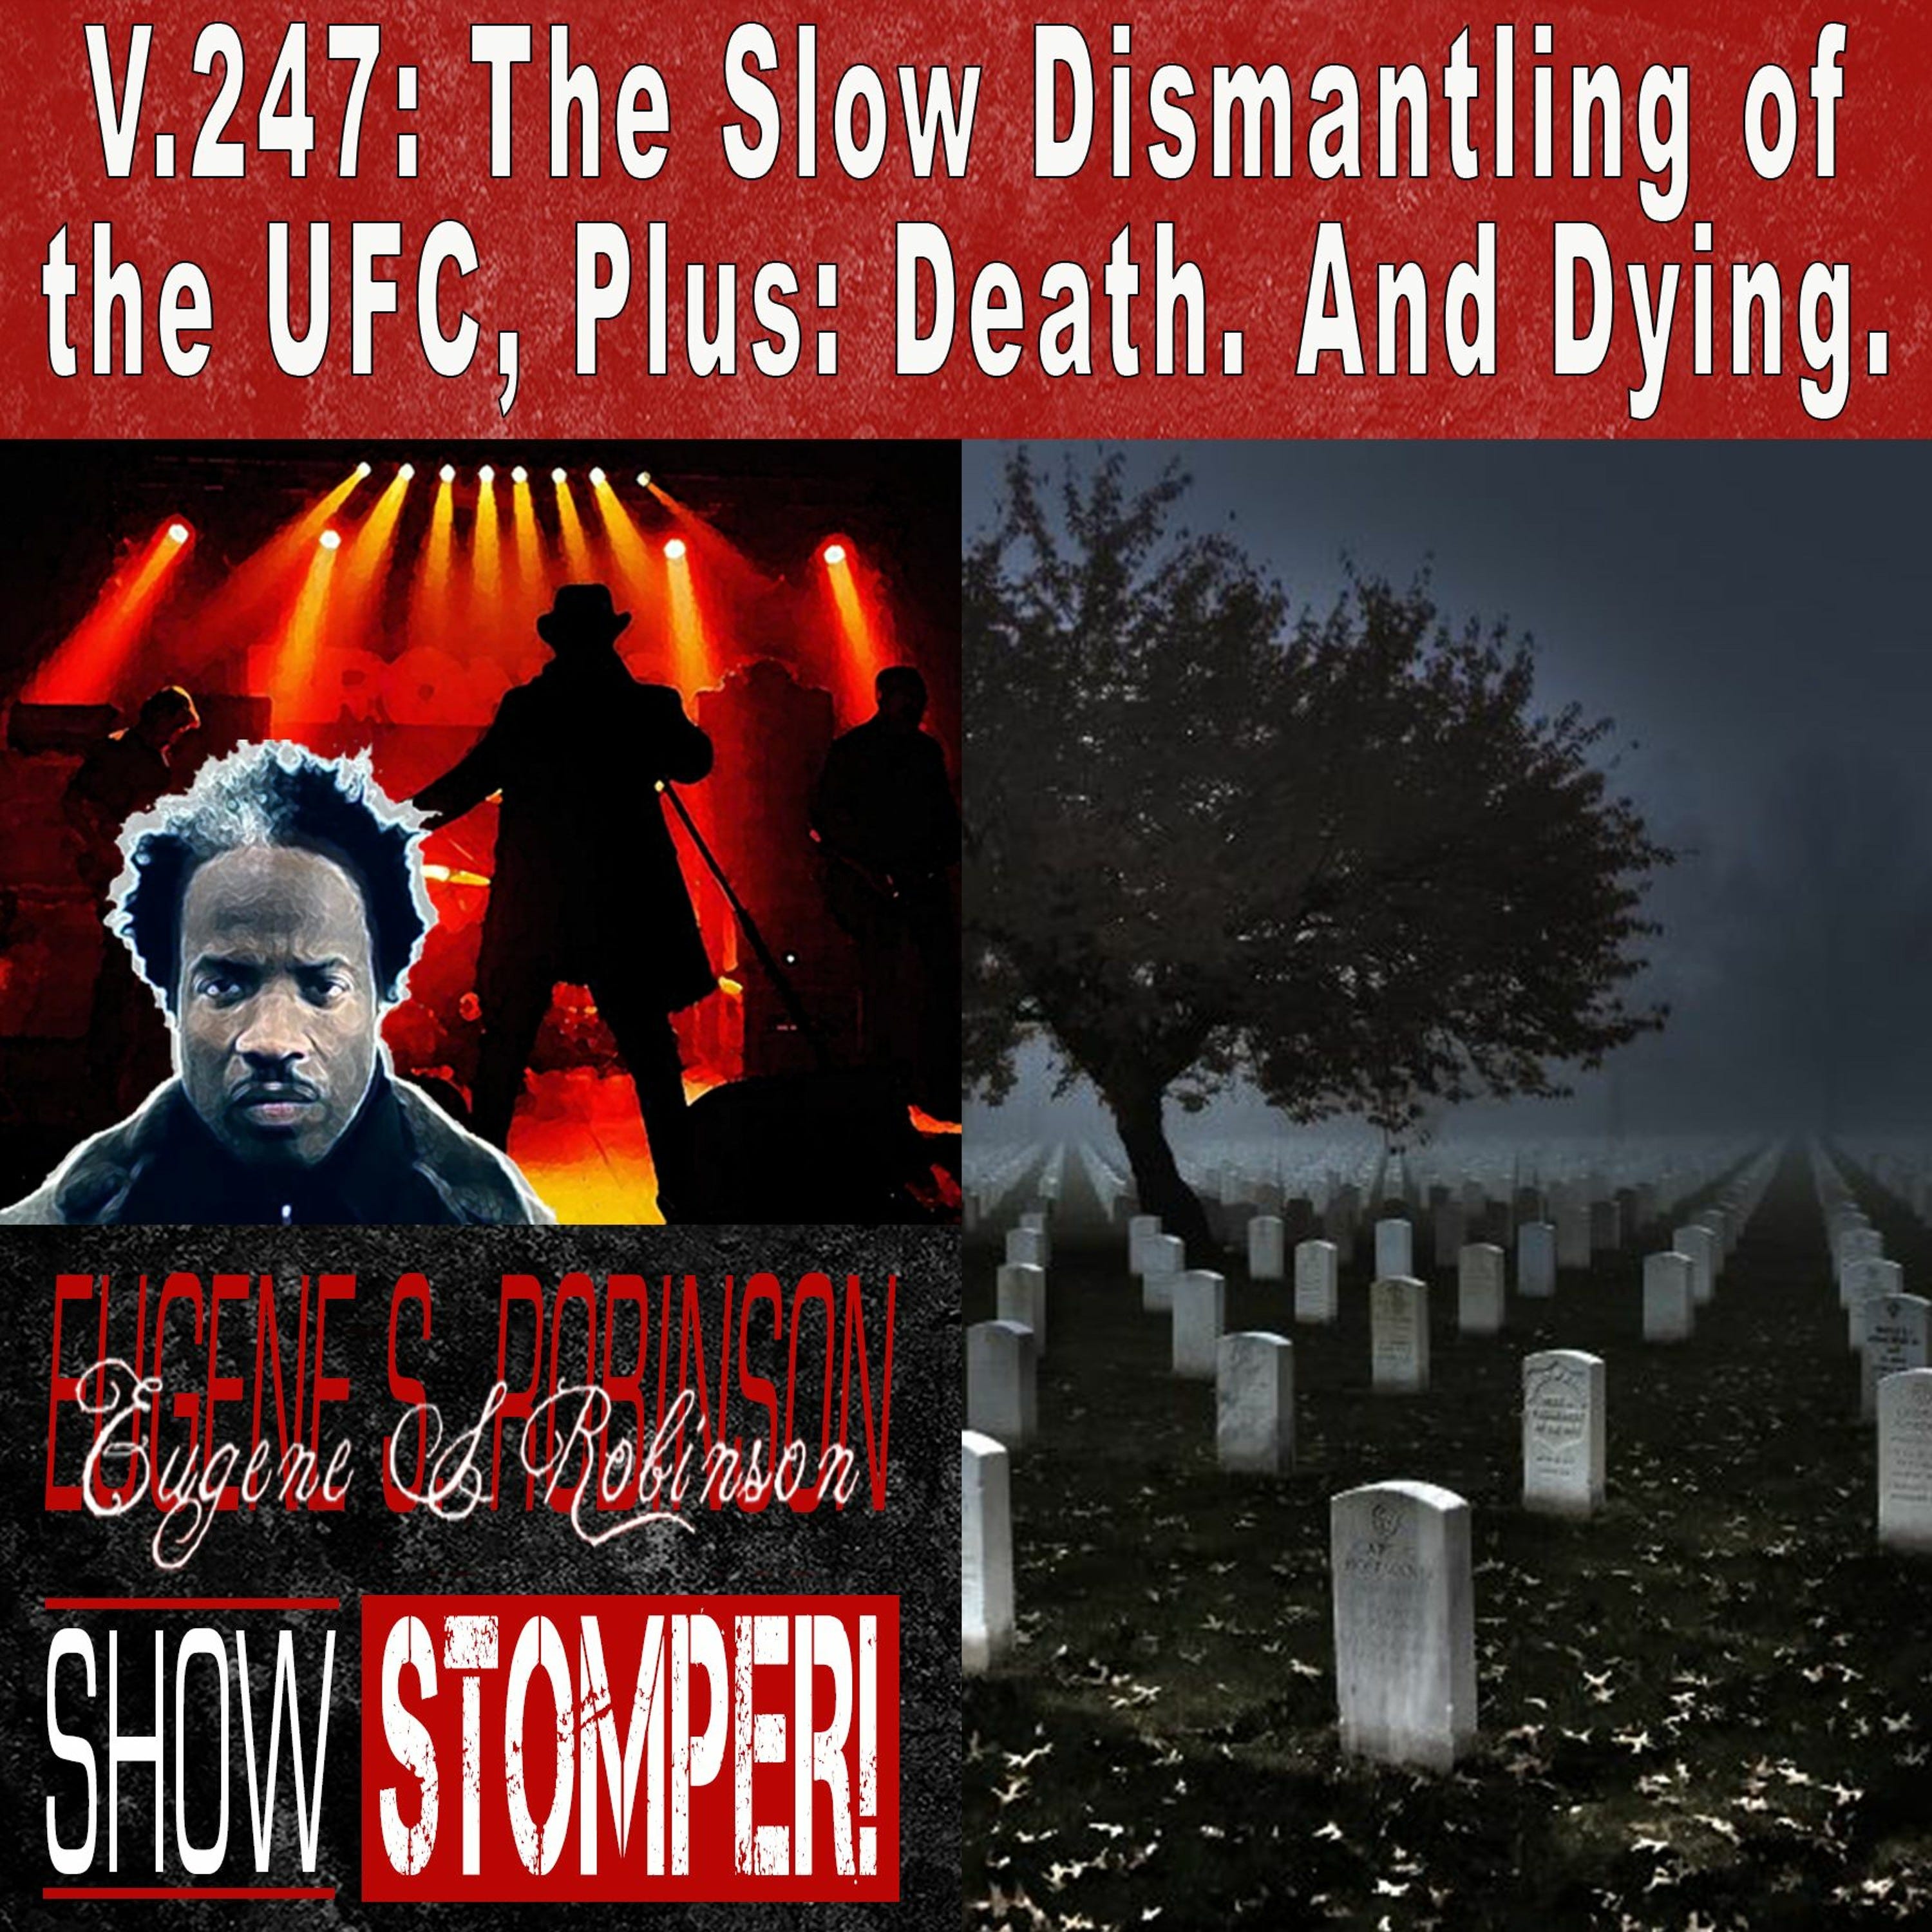 V.247: The Slow Dismantling of UFC, Plus: Death. And Dying. | The Eugene S. Robinson Show Stomper!